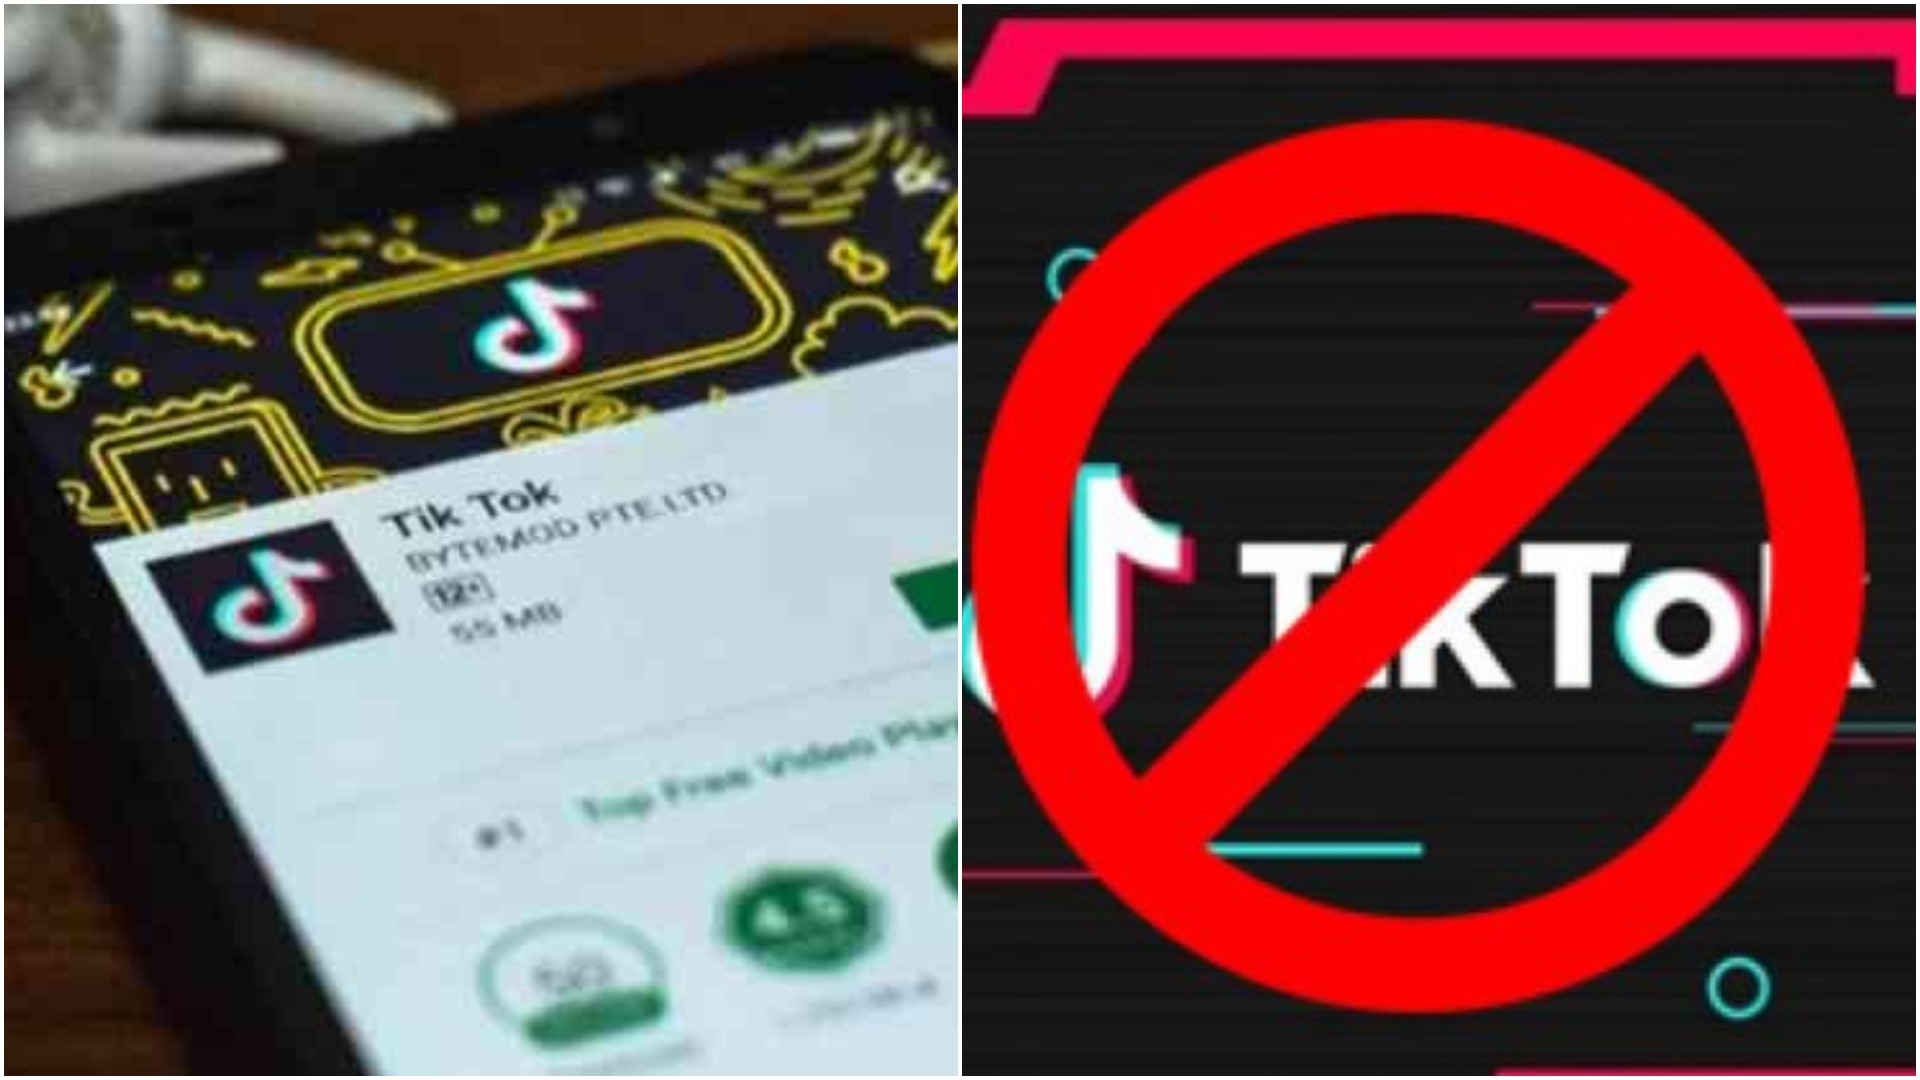 Tiktok Gets Banned In Pakistan & People Are Divided! - Diva Magazine